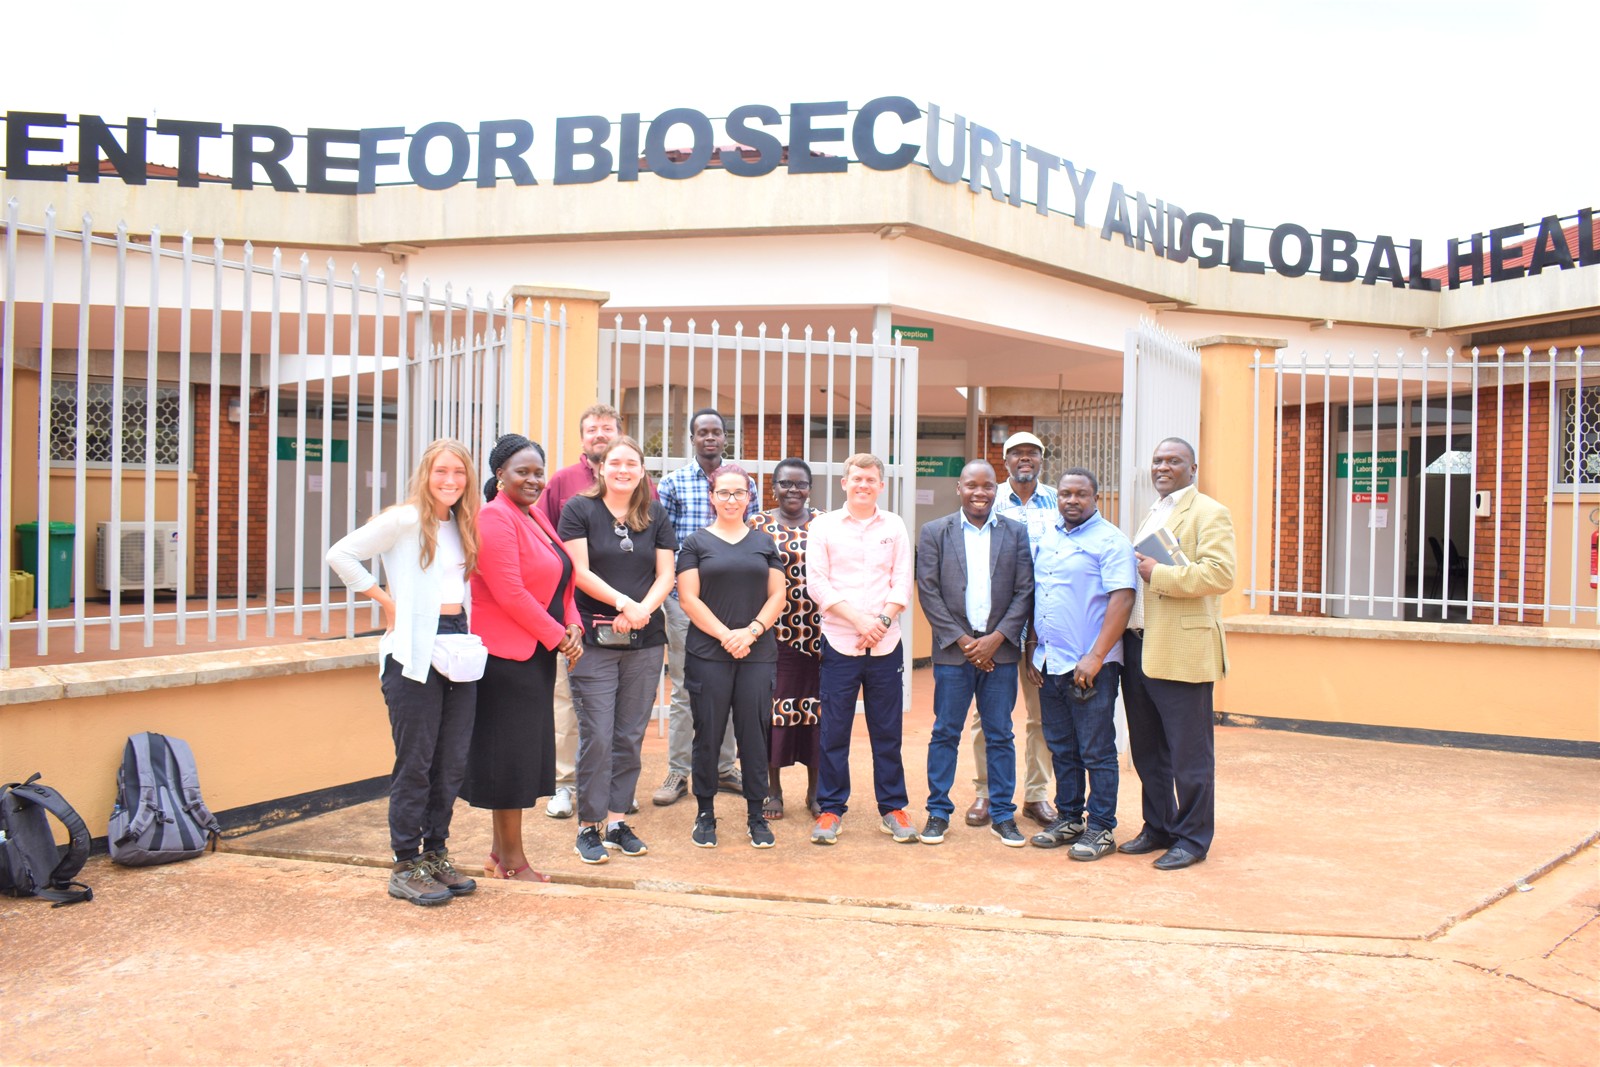 CoVAB staff pose for a photo with the Summer School students from Mississippi State Universtity on 1st July 2022 at the Centre for Bio Security and Global Health (CeBIGH), College of Veterinary Medicine, Animal Resources and Bio-security (CoVAB), Makerere University.